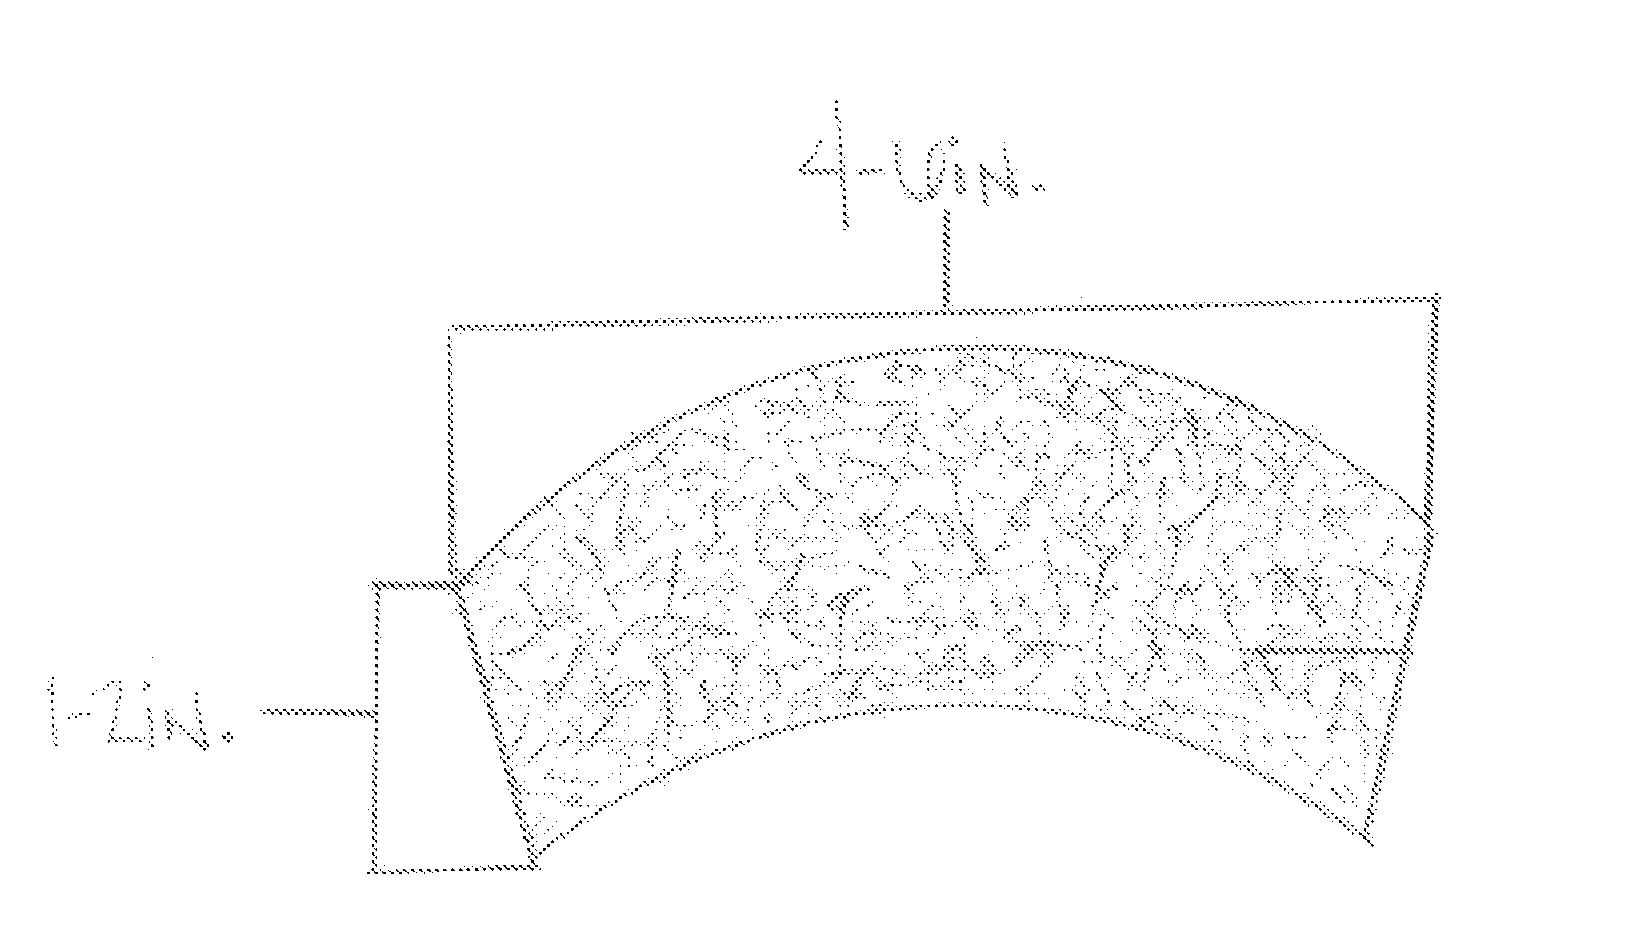 Acoustical modification device for musical instruments in the brass family